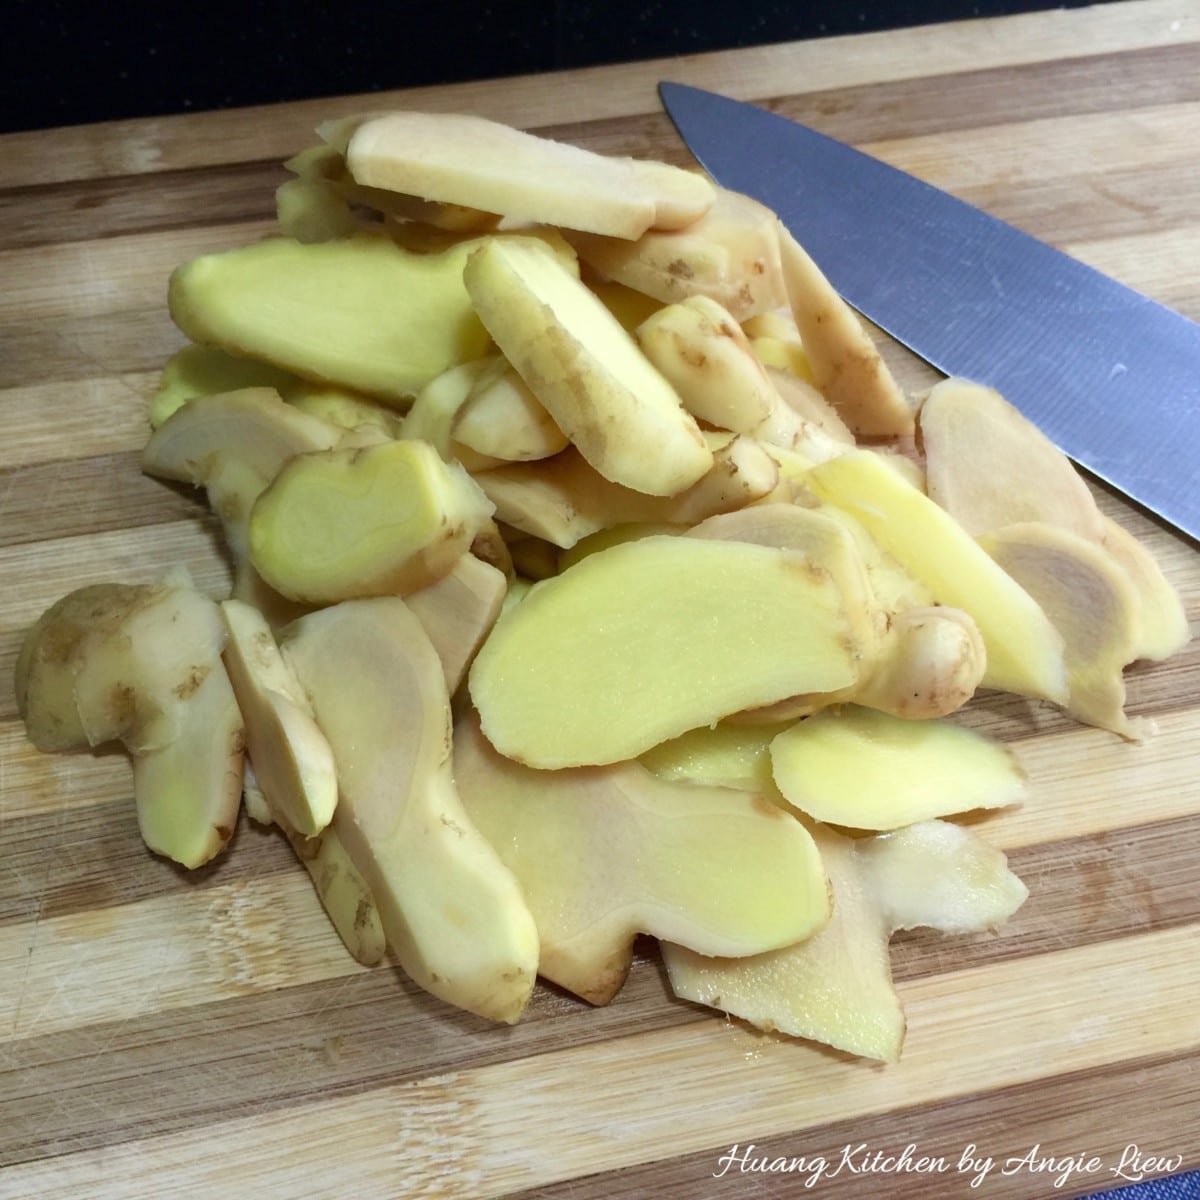 Peel and slice ginger.